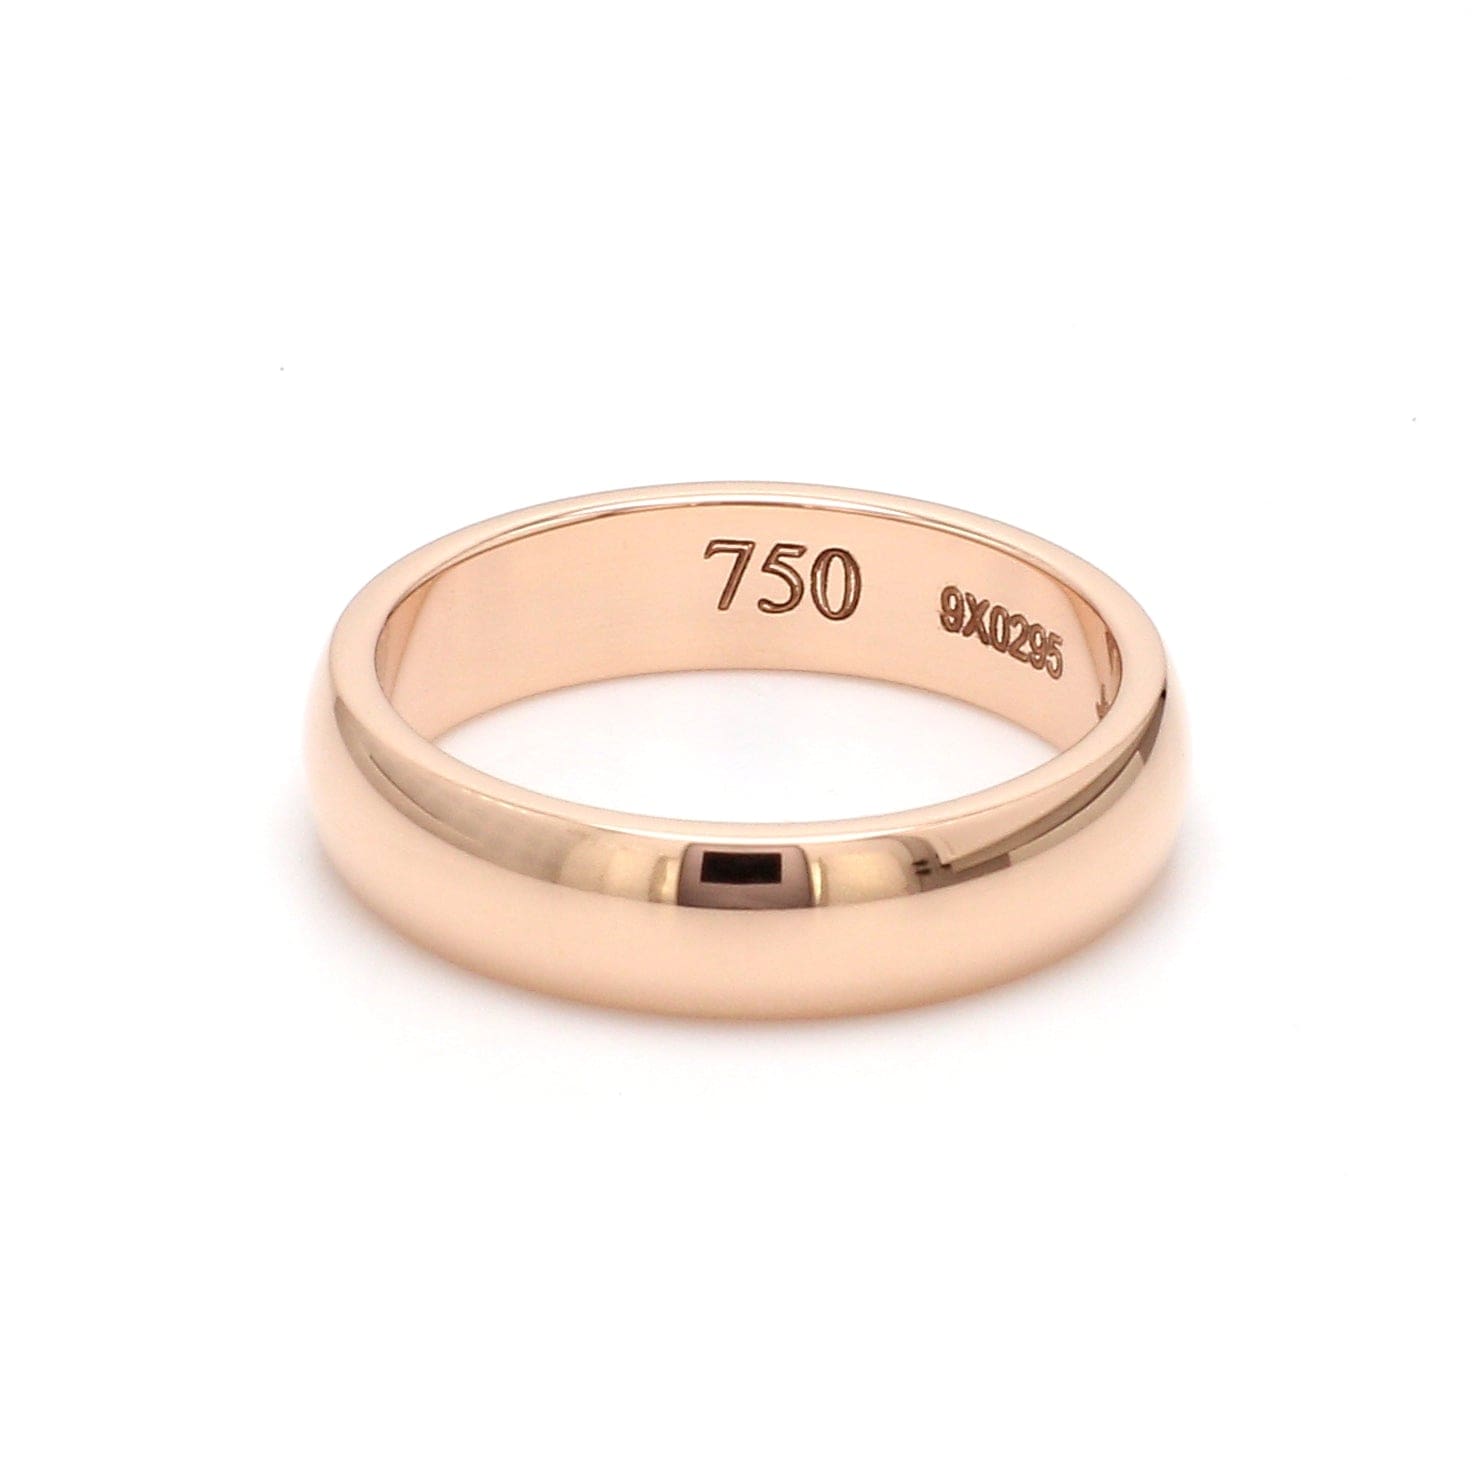 Kataoka | Diamond Solitaire 18k Rose Gold Ring at Voiage Jewelry